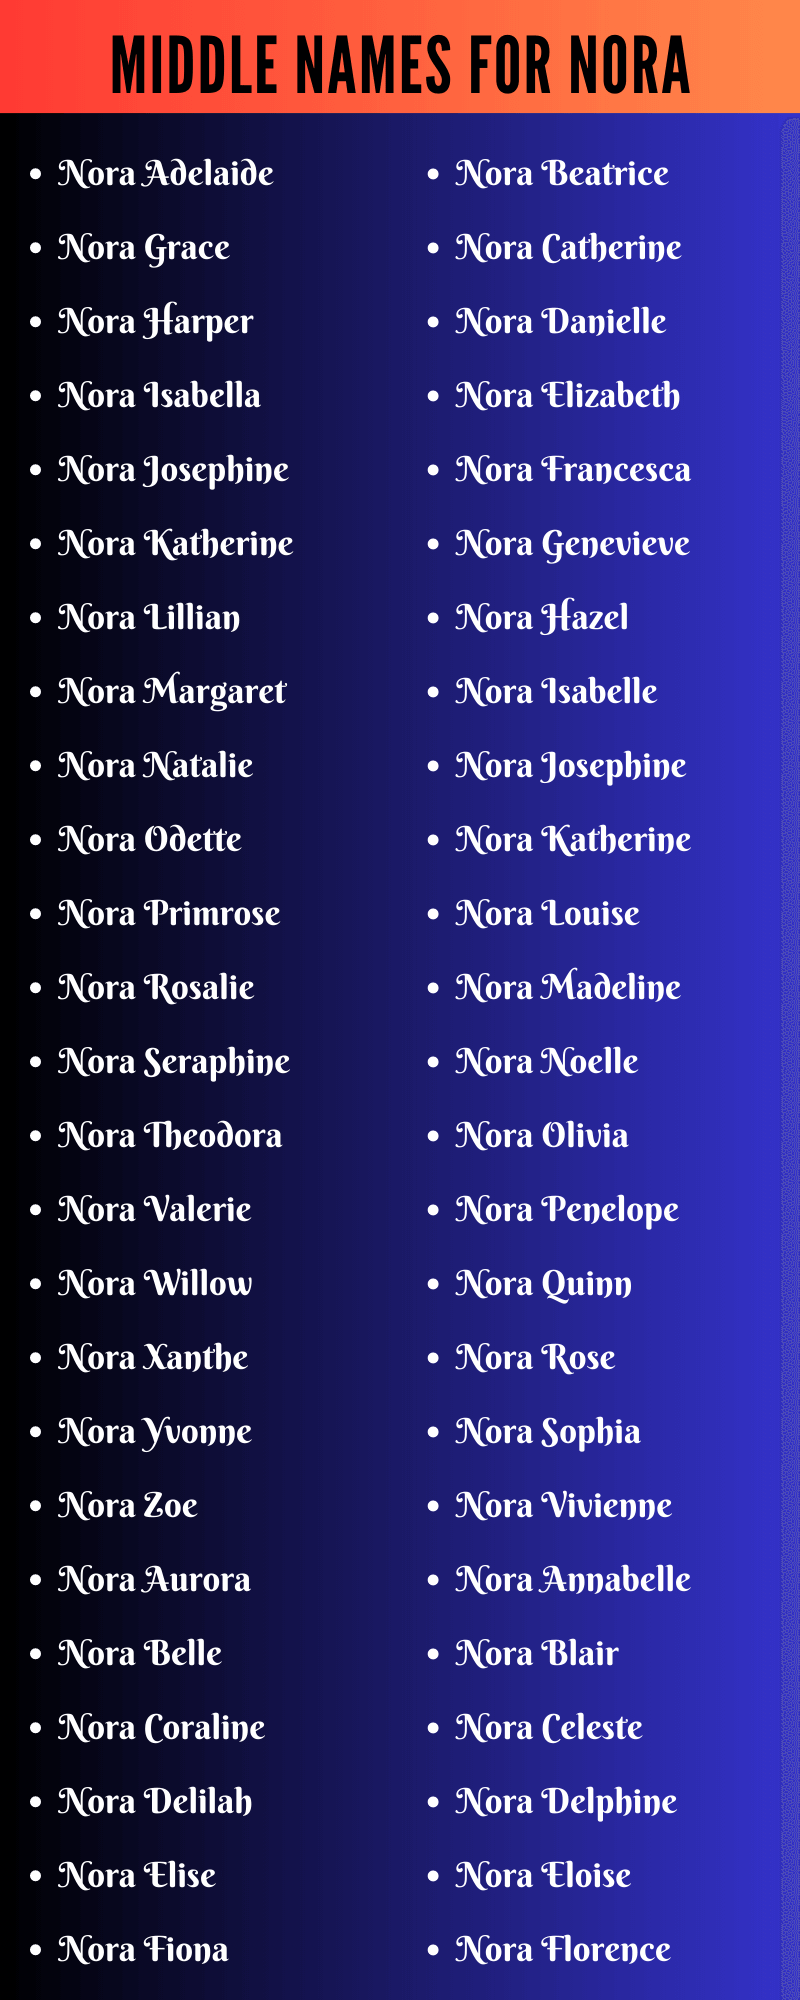 Middle Names For Nora